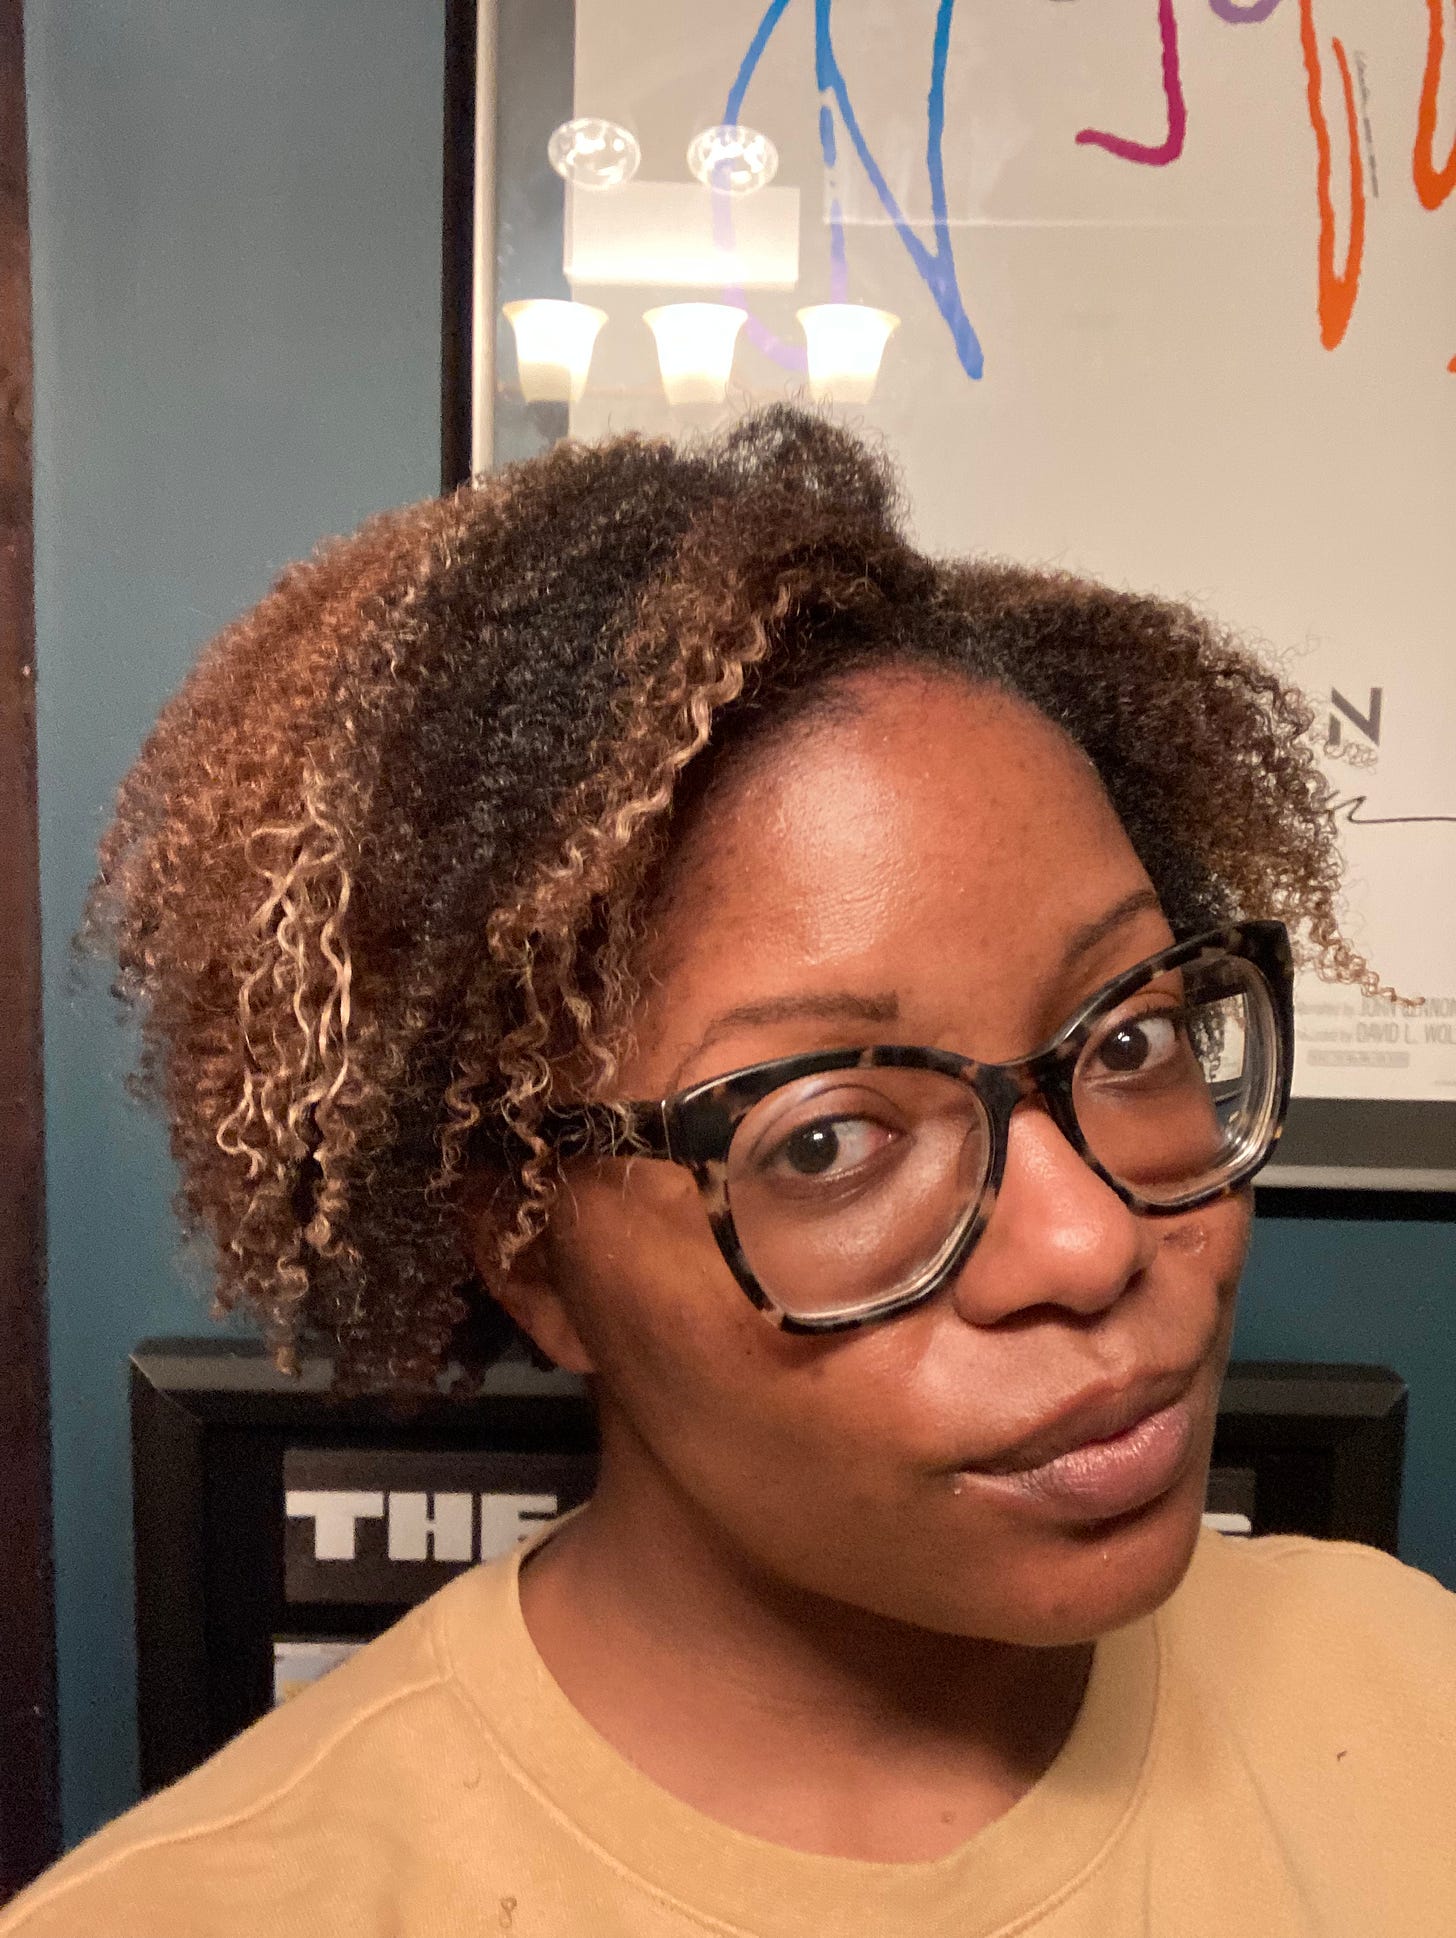 Picture of a Black woman wearing a tan sweatshirt, glasses and a curly haircut with brown and blonde highlights